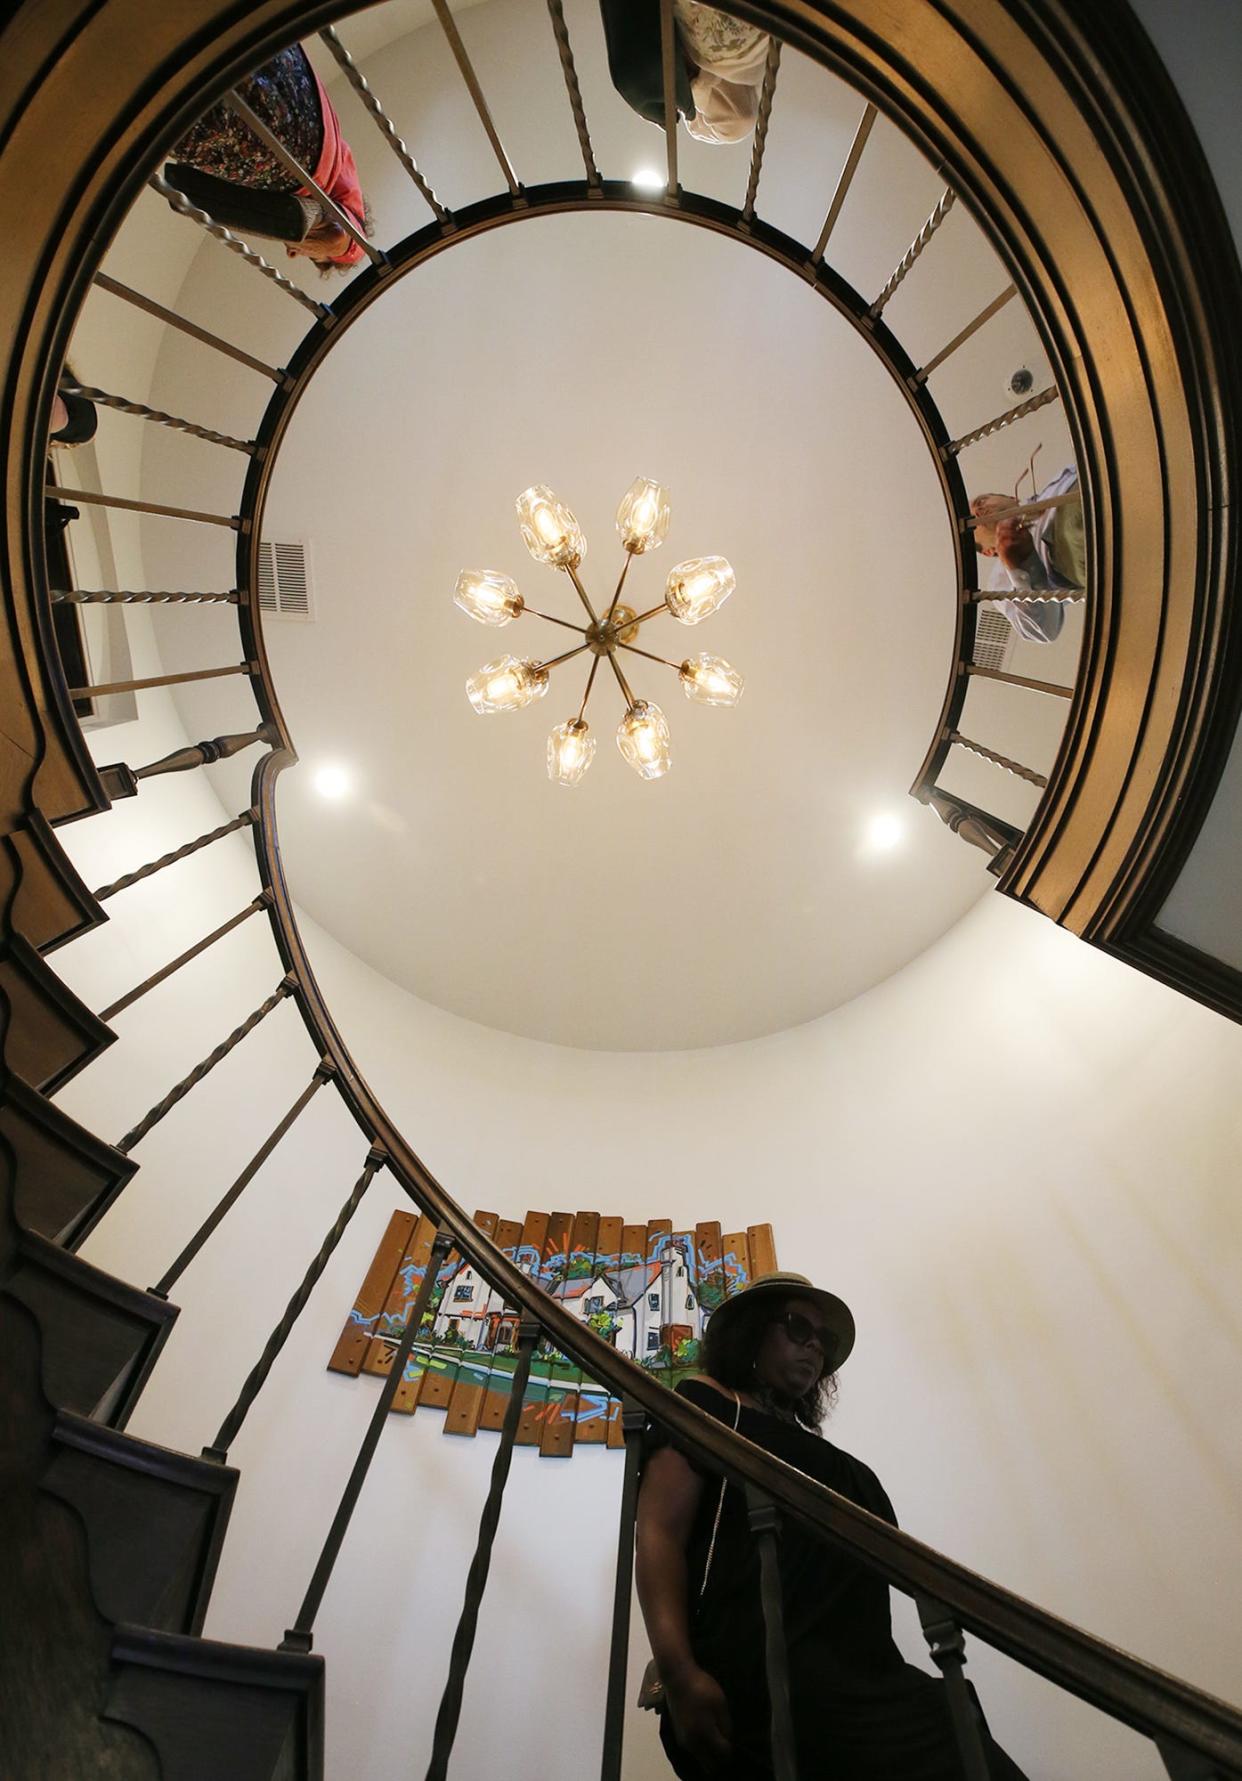 Visitors walk down the spiral staircase as they tour the Summit County Land Bank's new offices at the former home of John S. Knight after the grand opening ceremony in Akron on Friday.